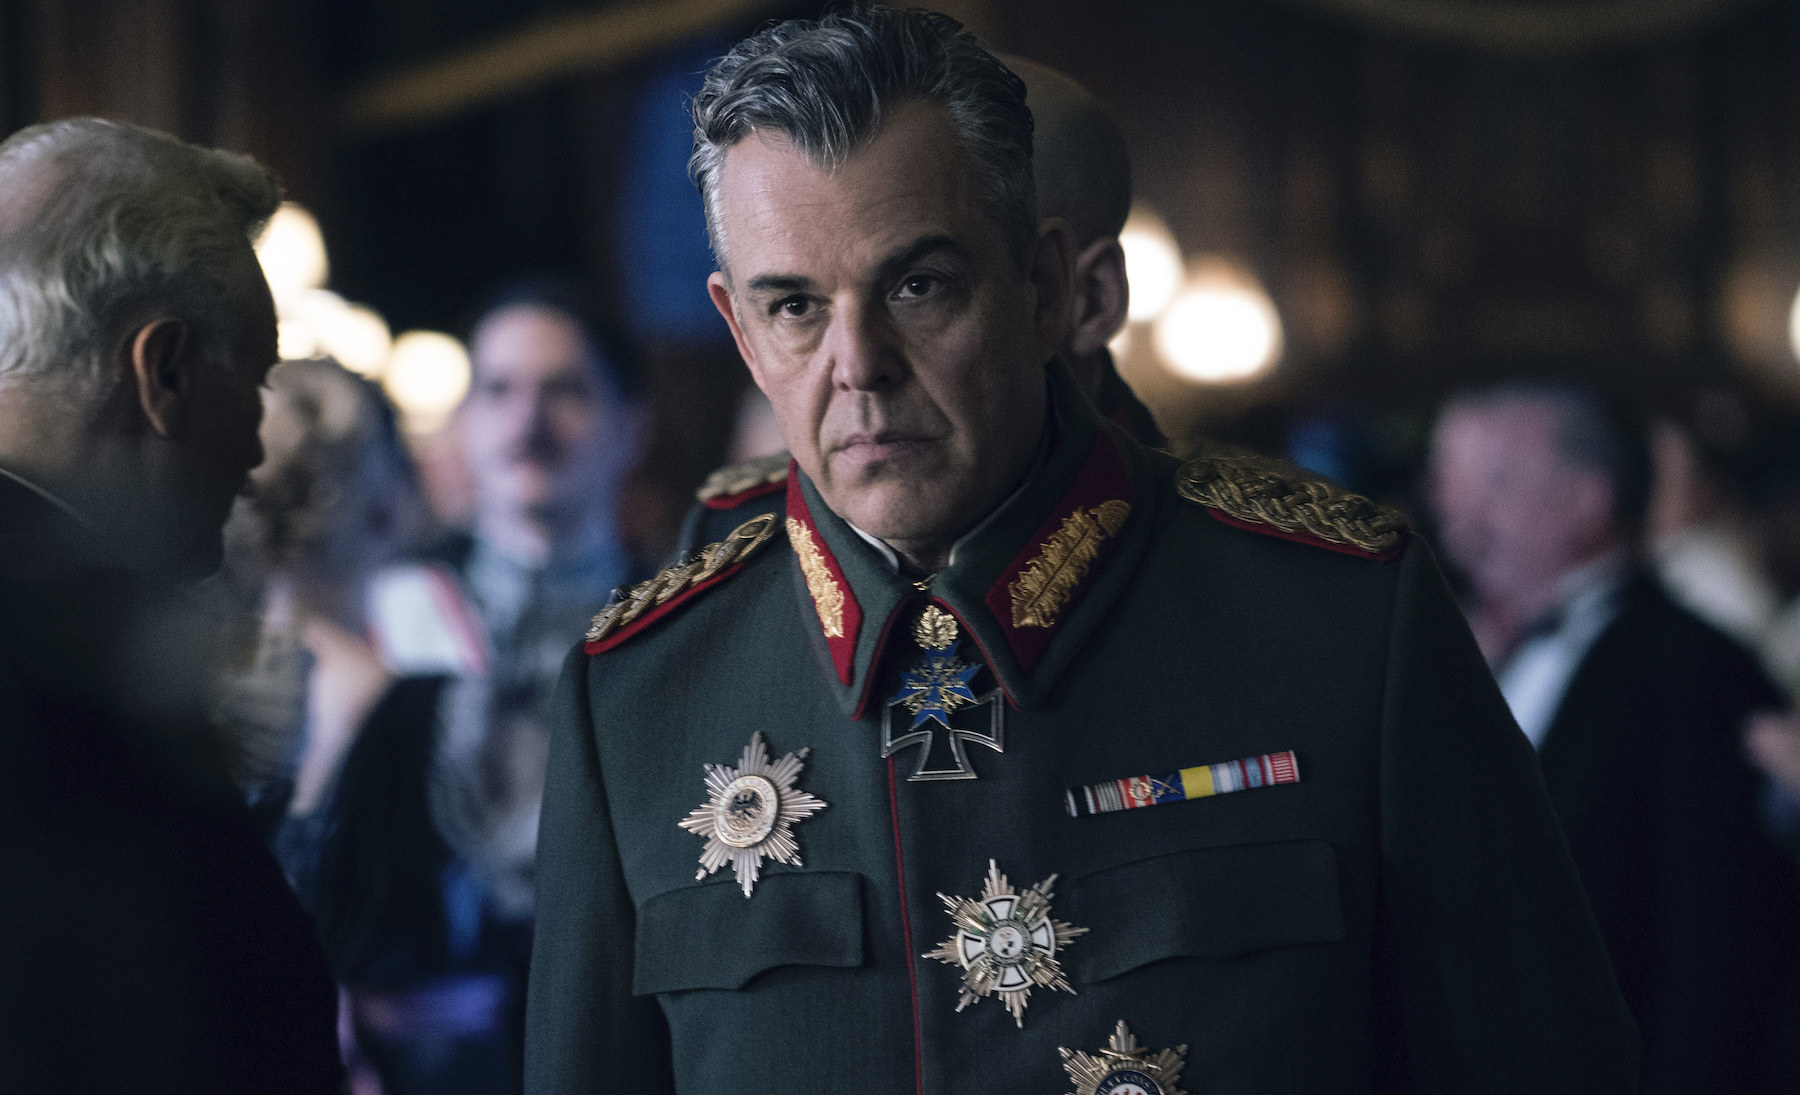 A still from Wonder Woman showing Danny Huston in a green officers uniform